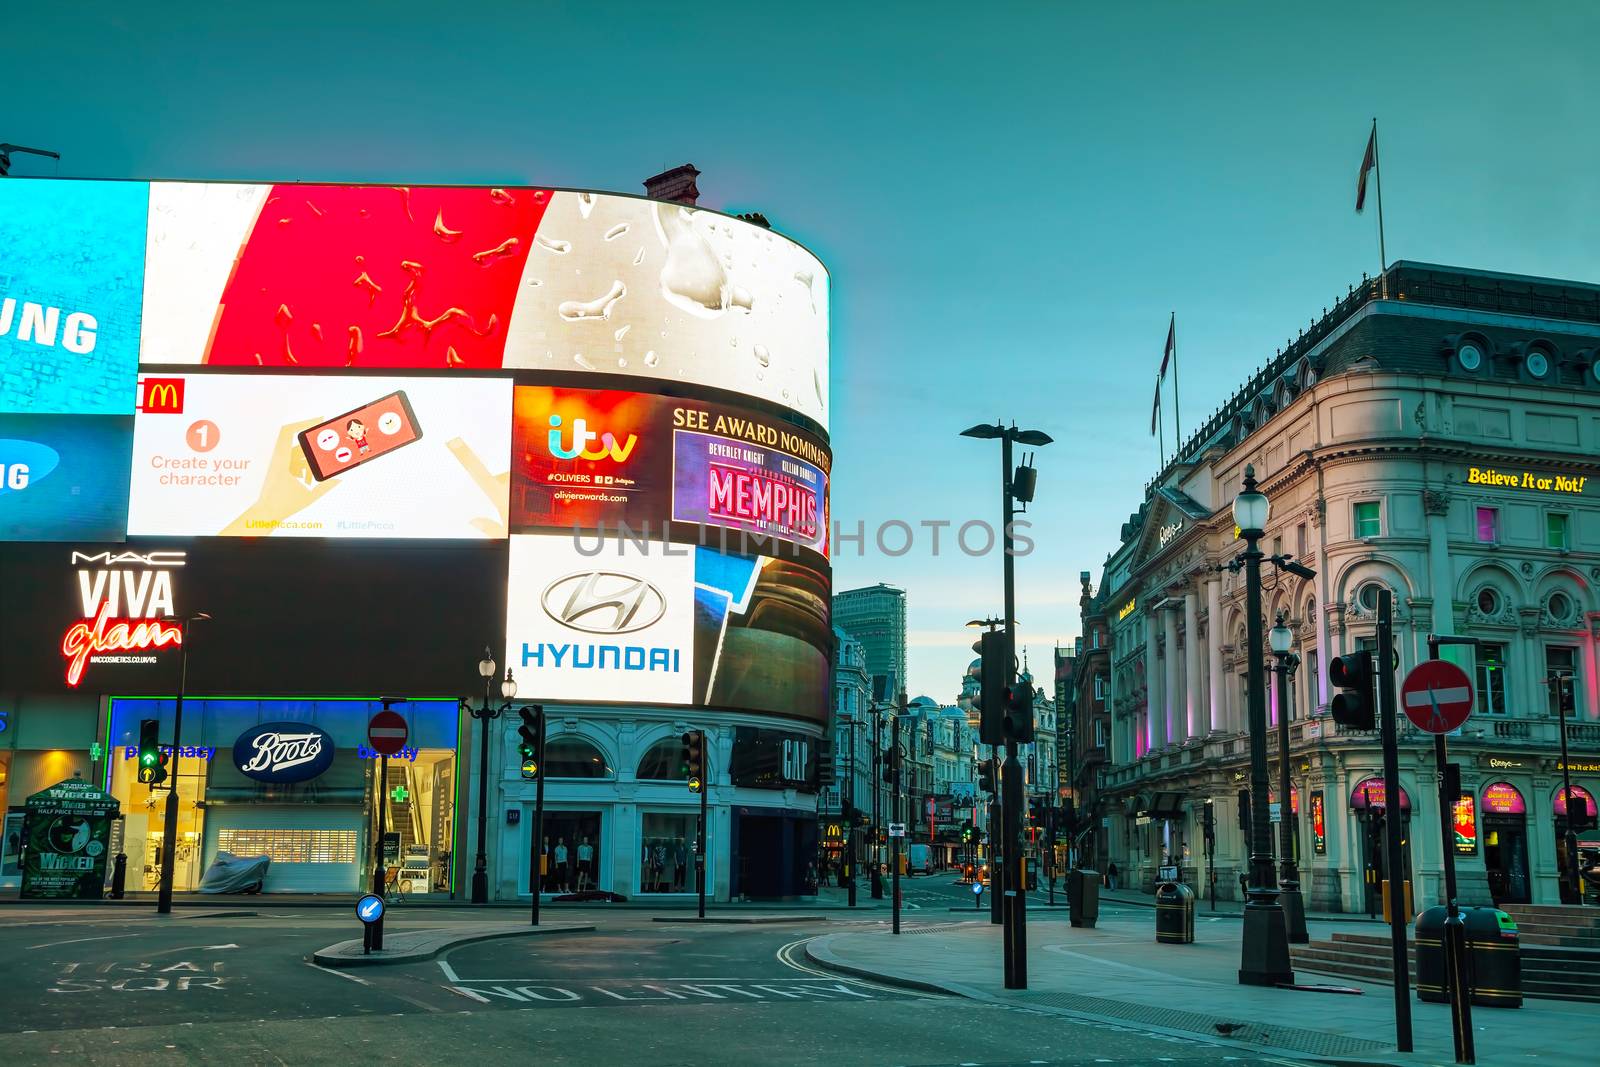 Piccadilly Circus junction in London by AndreyKr